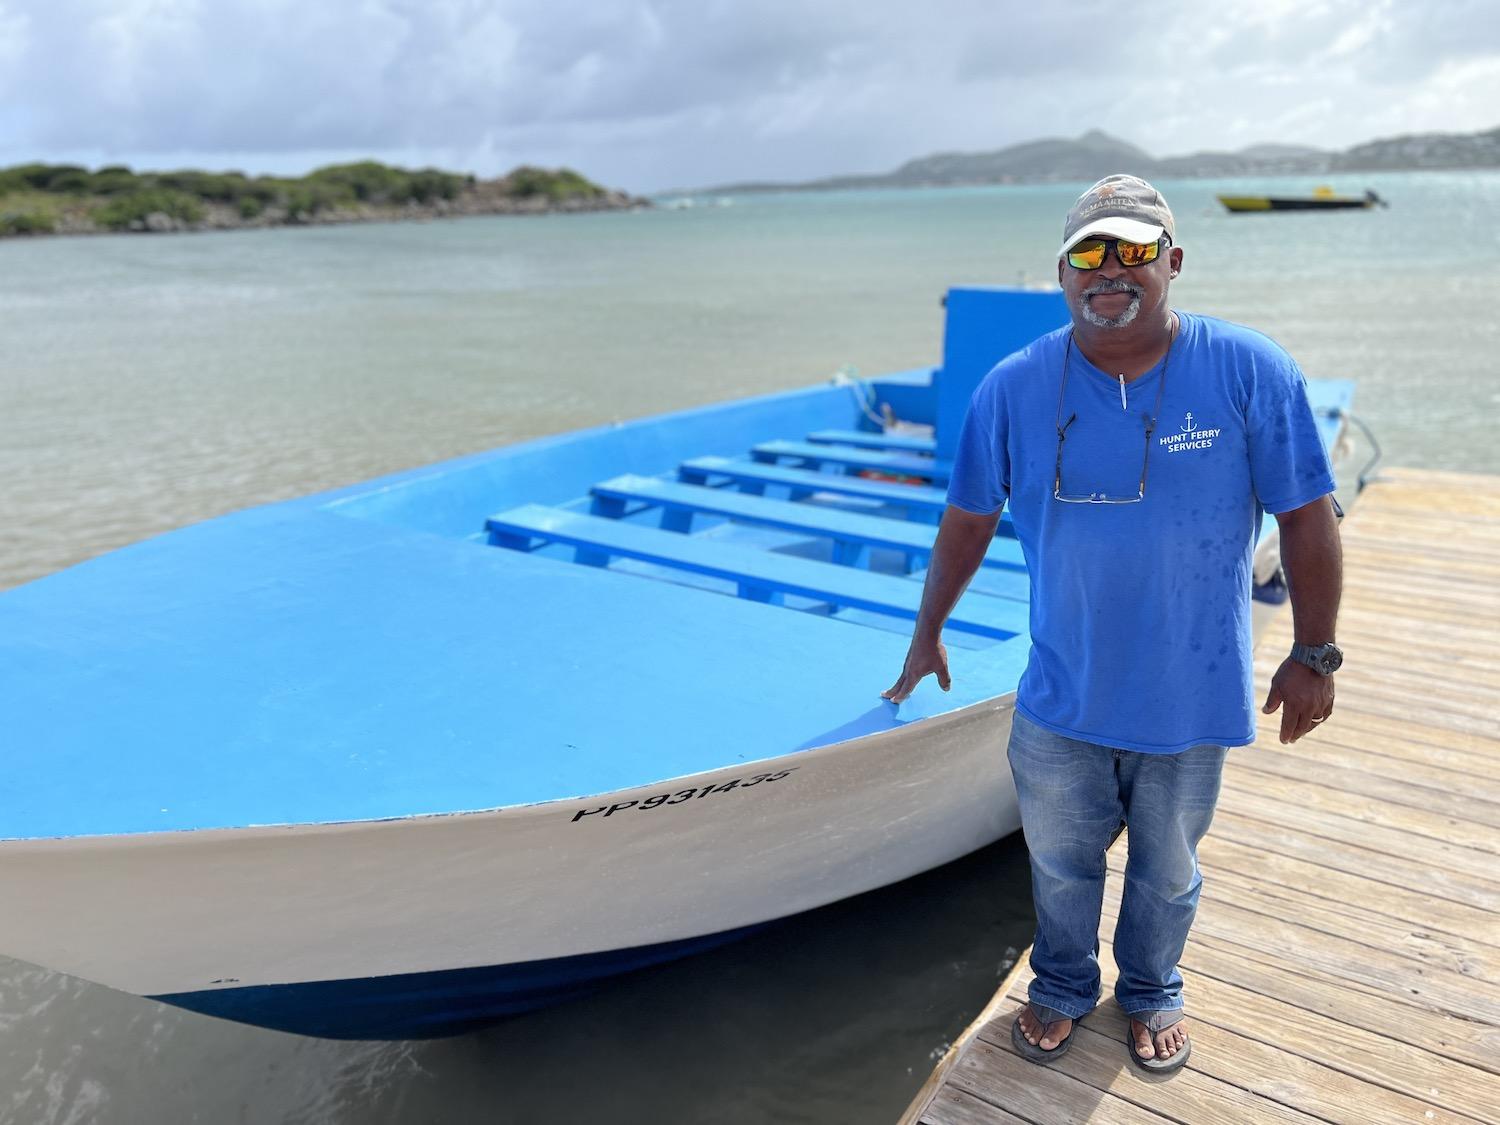 Mike Hunt is one of the captains who ferries people over to Pinel Island, a protected part of St. Martin.